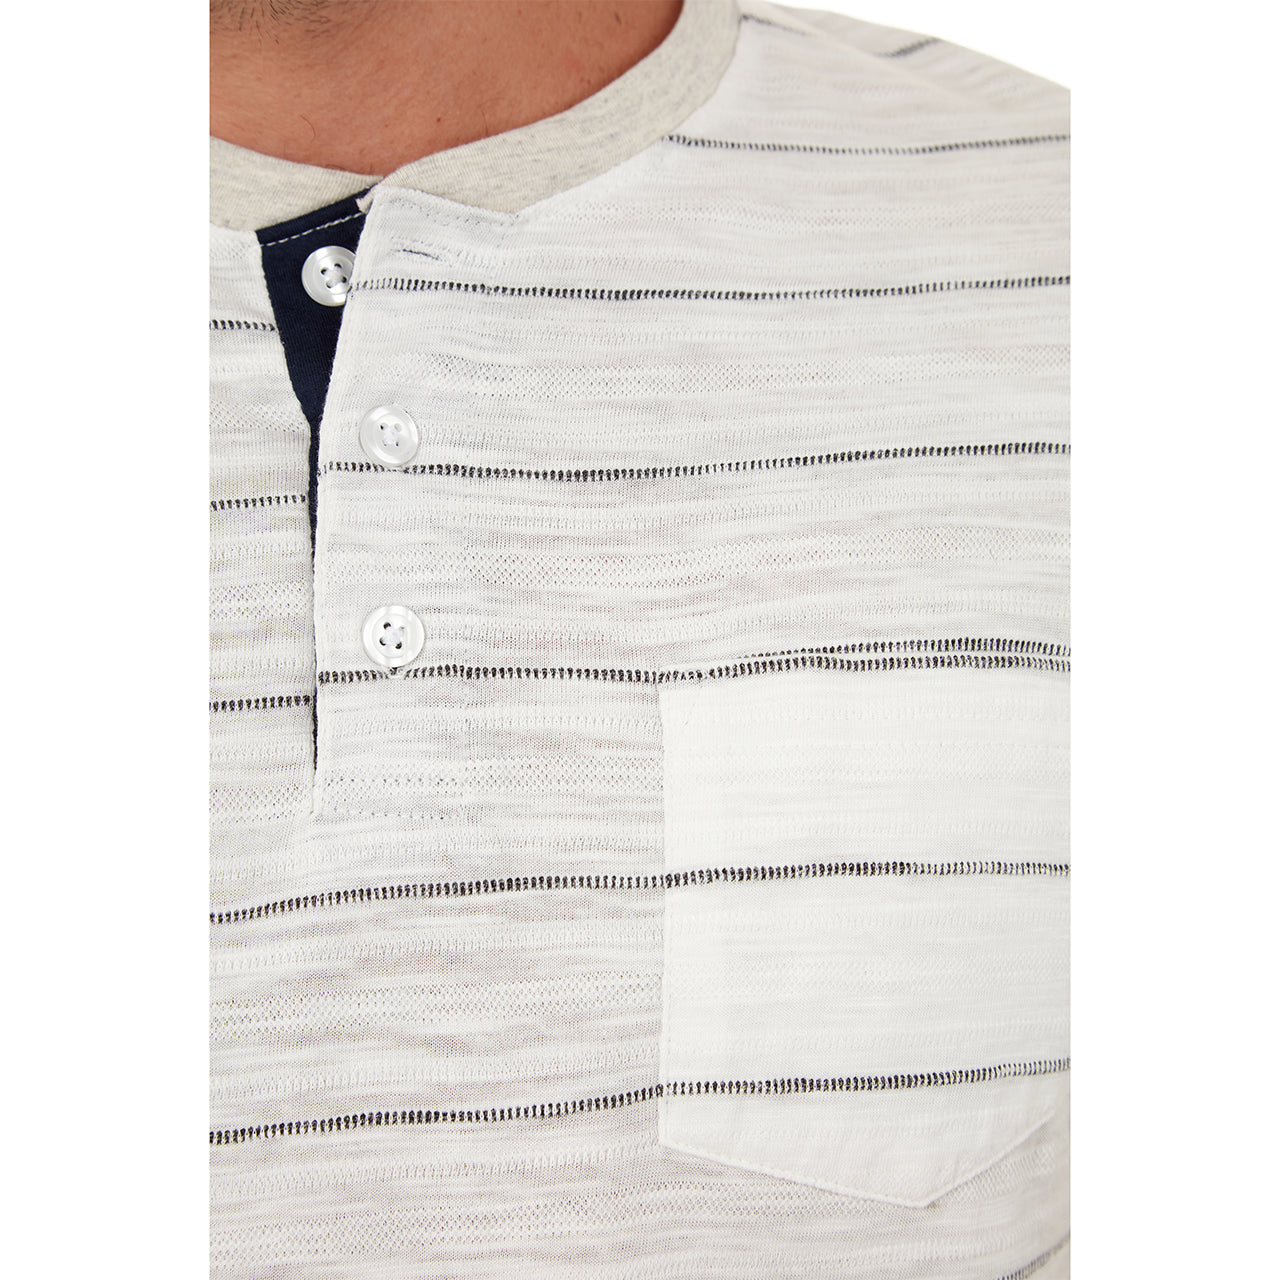 Cream Stripe Henley for Men close up of chest and pocket